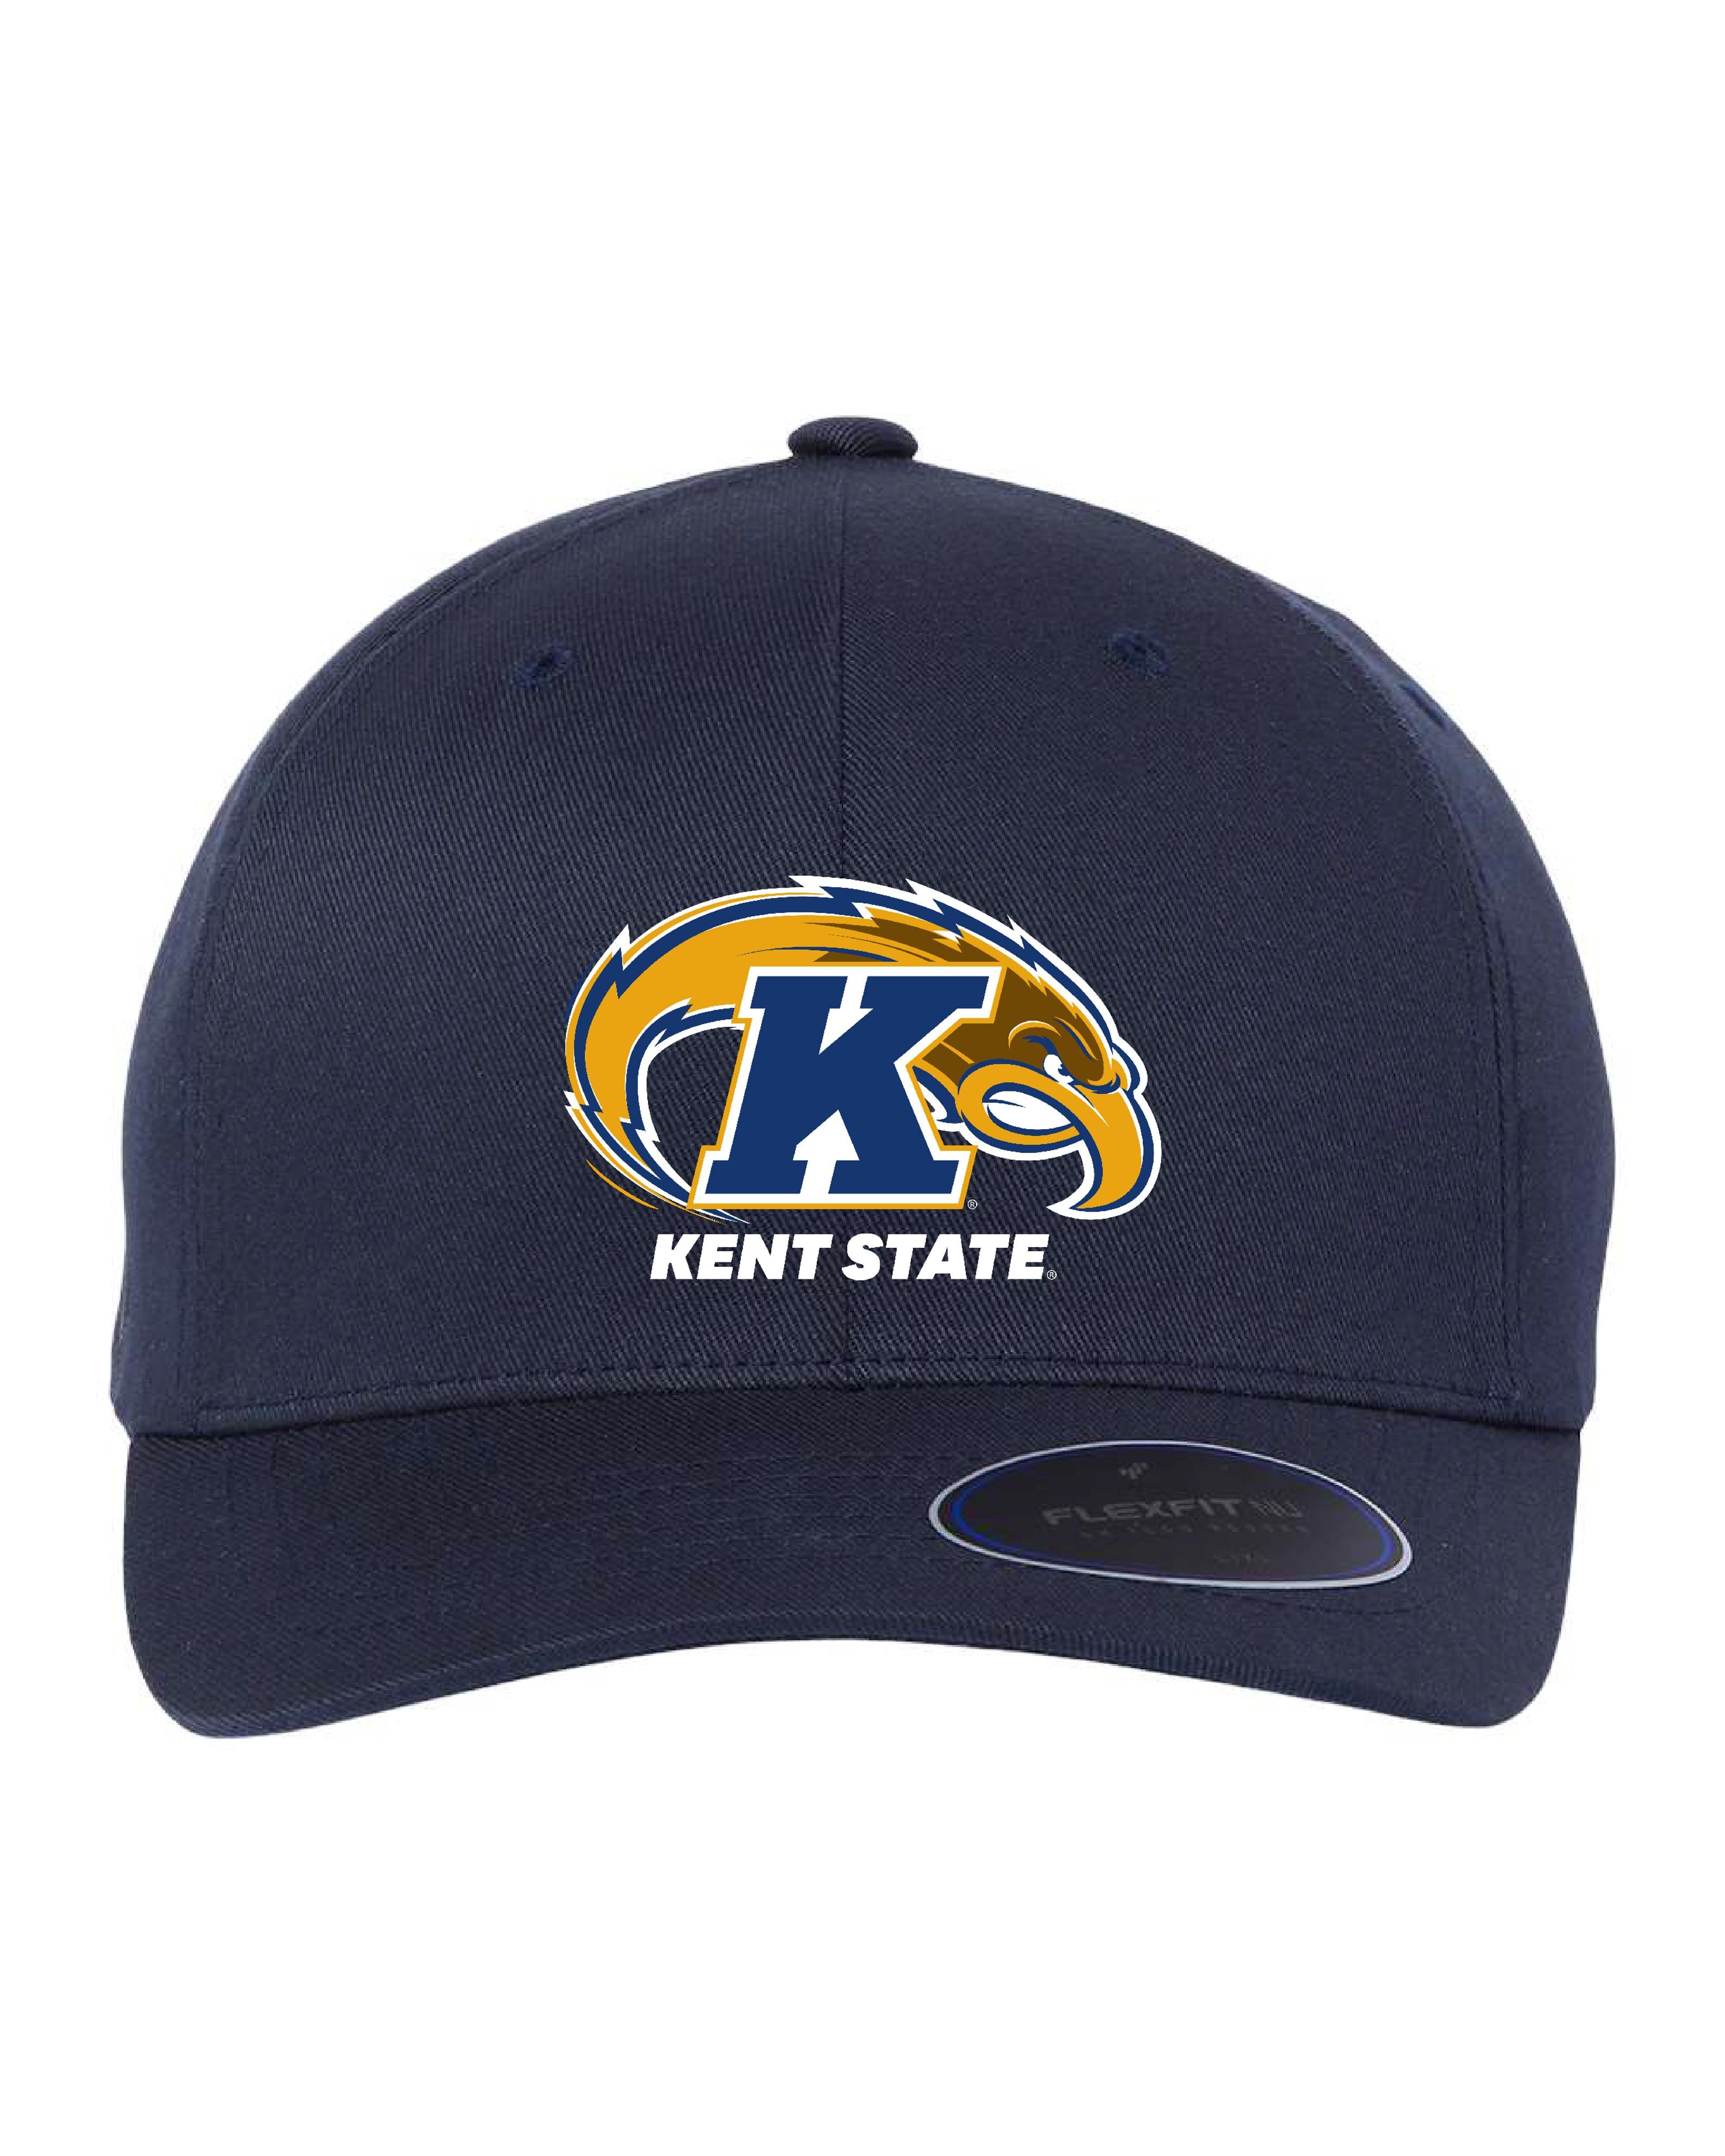 Kent State Golden Flashes Navy Hat